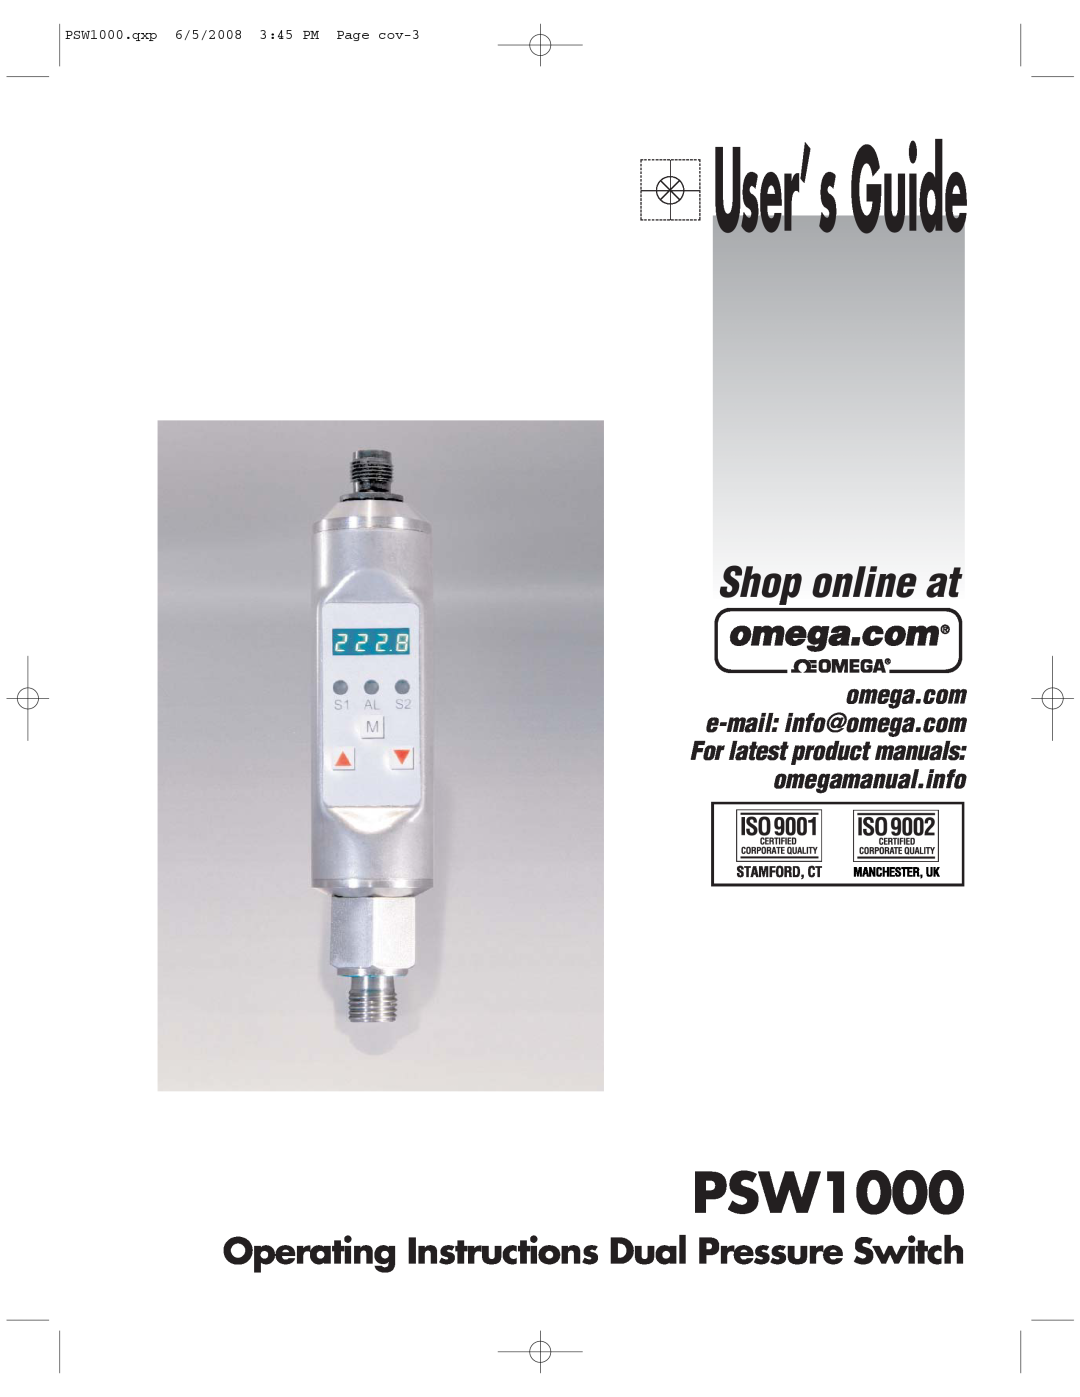 Omega Engineering PSW1000 manual User’ sGuide, Shop online at, Operating Instructions Dual Pressure Switch 